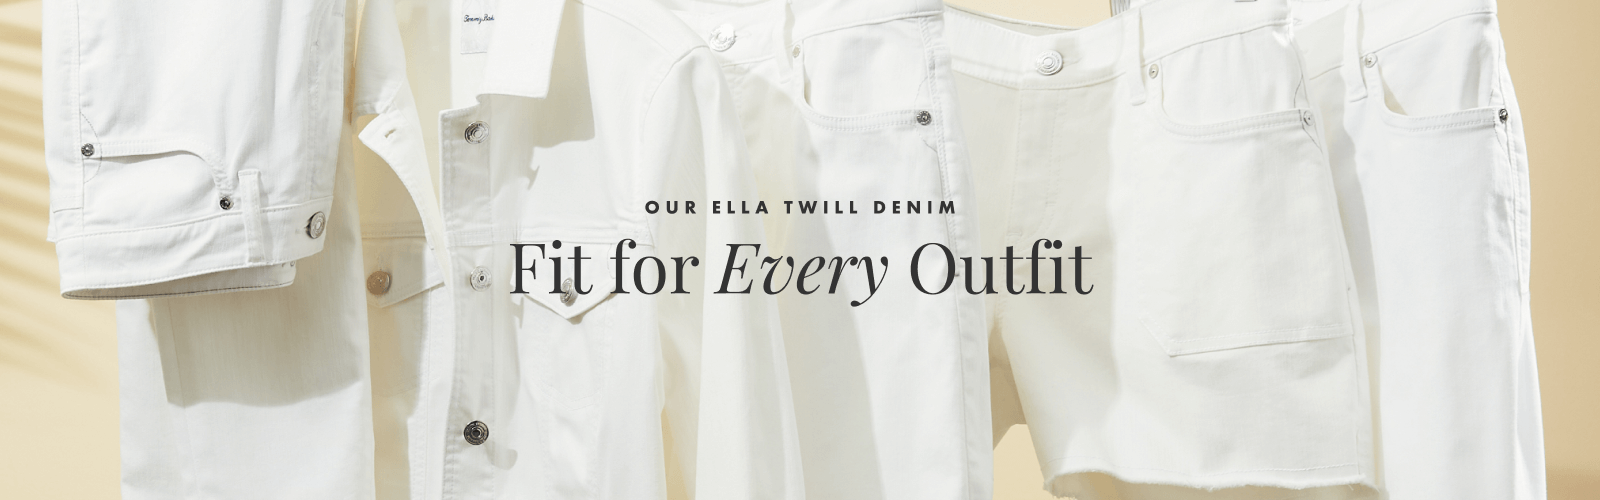 Our Ella Twill Denim: Fit for Every Outfit